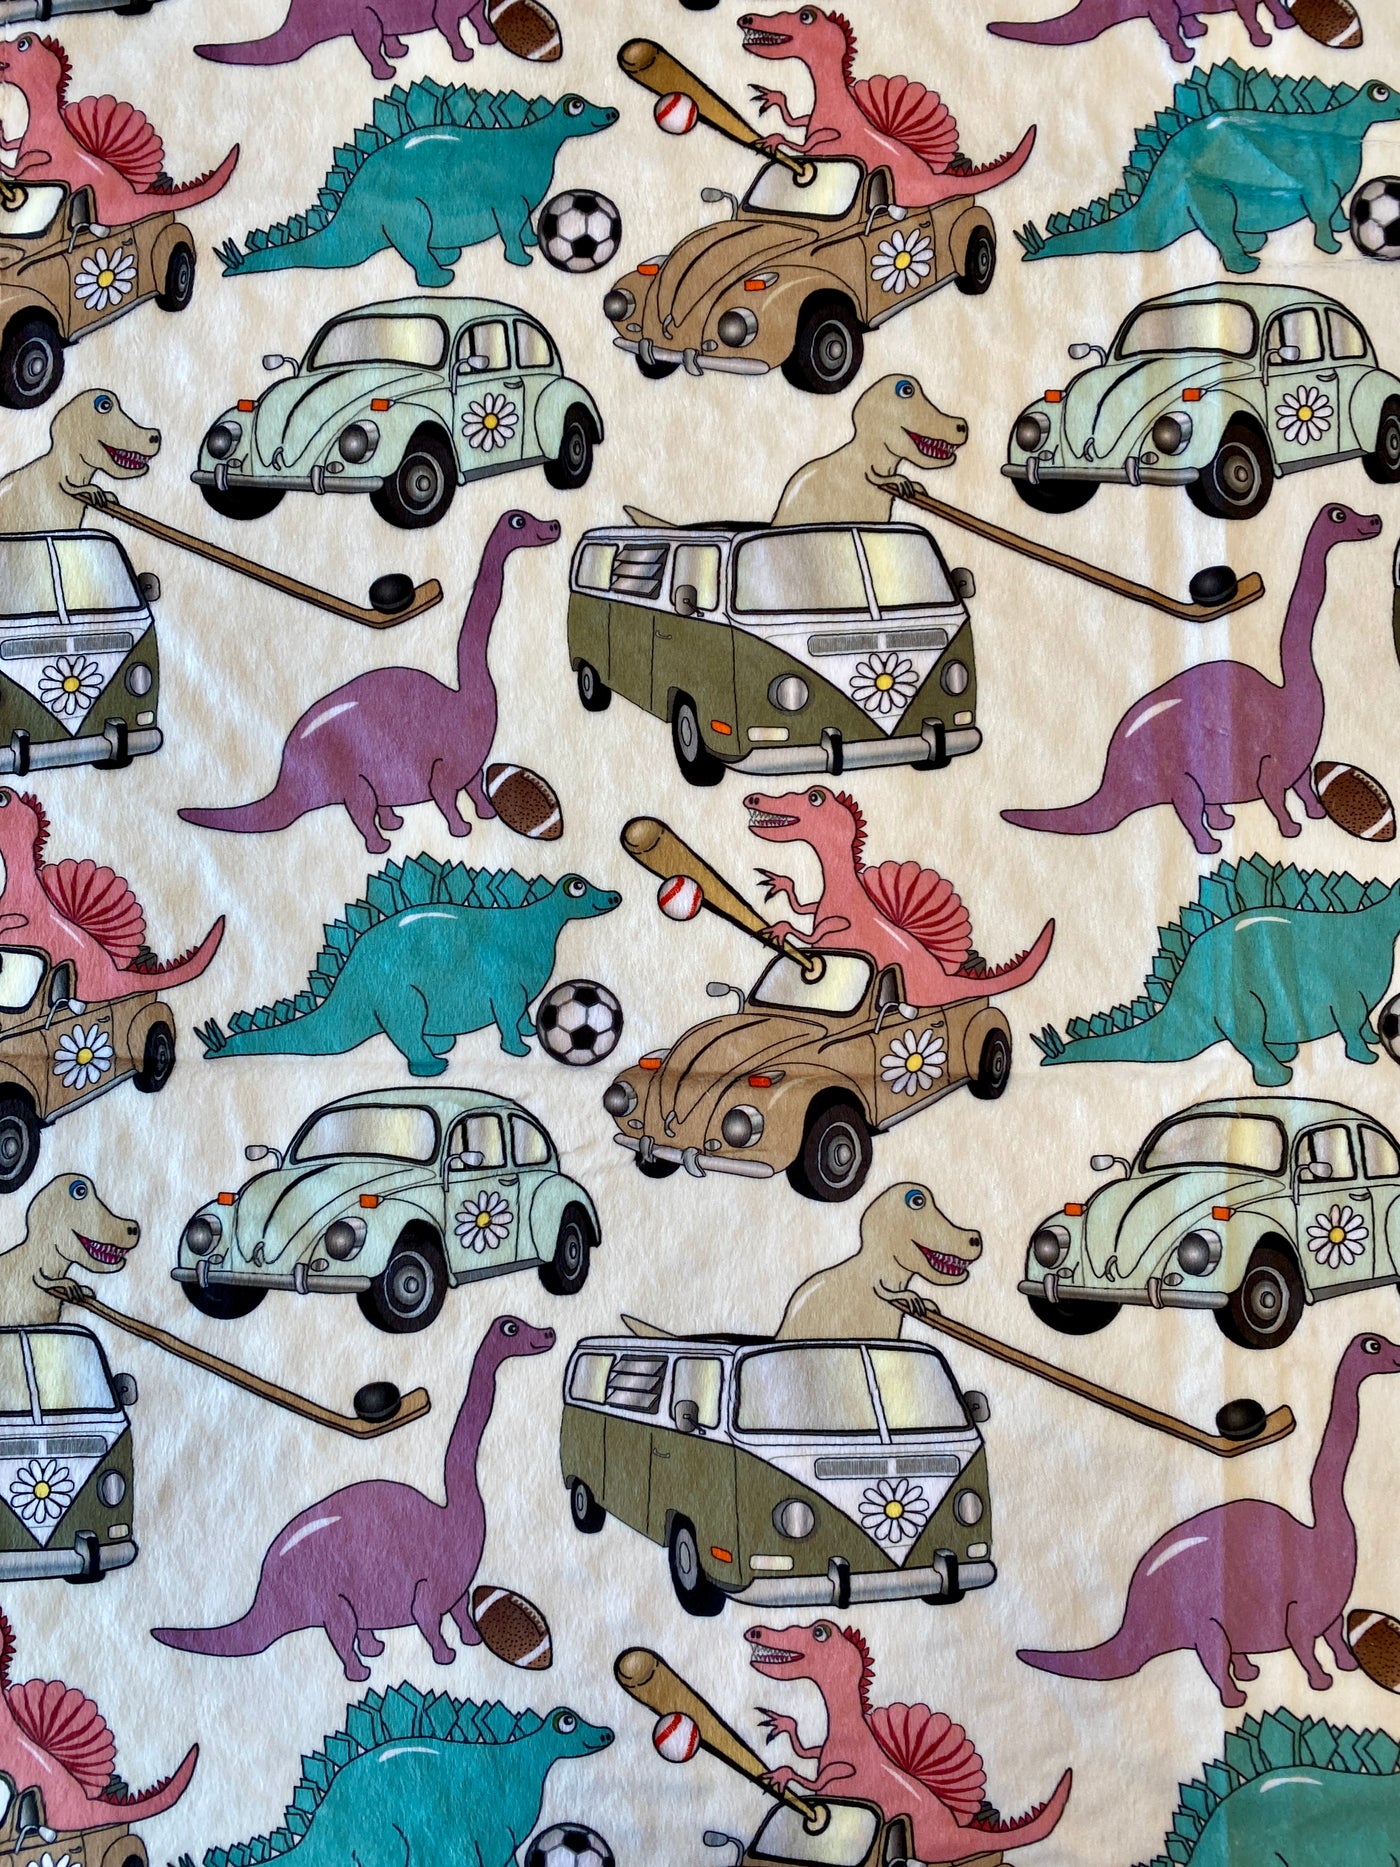 Baby blanket: The Dinosaurs in their car